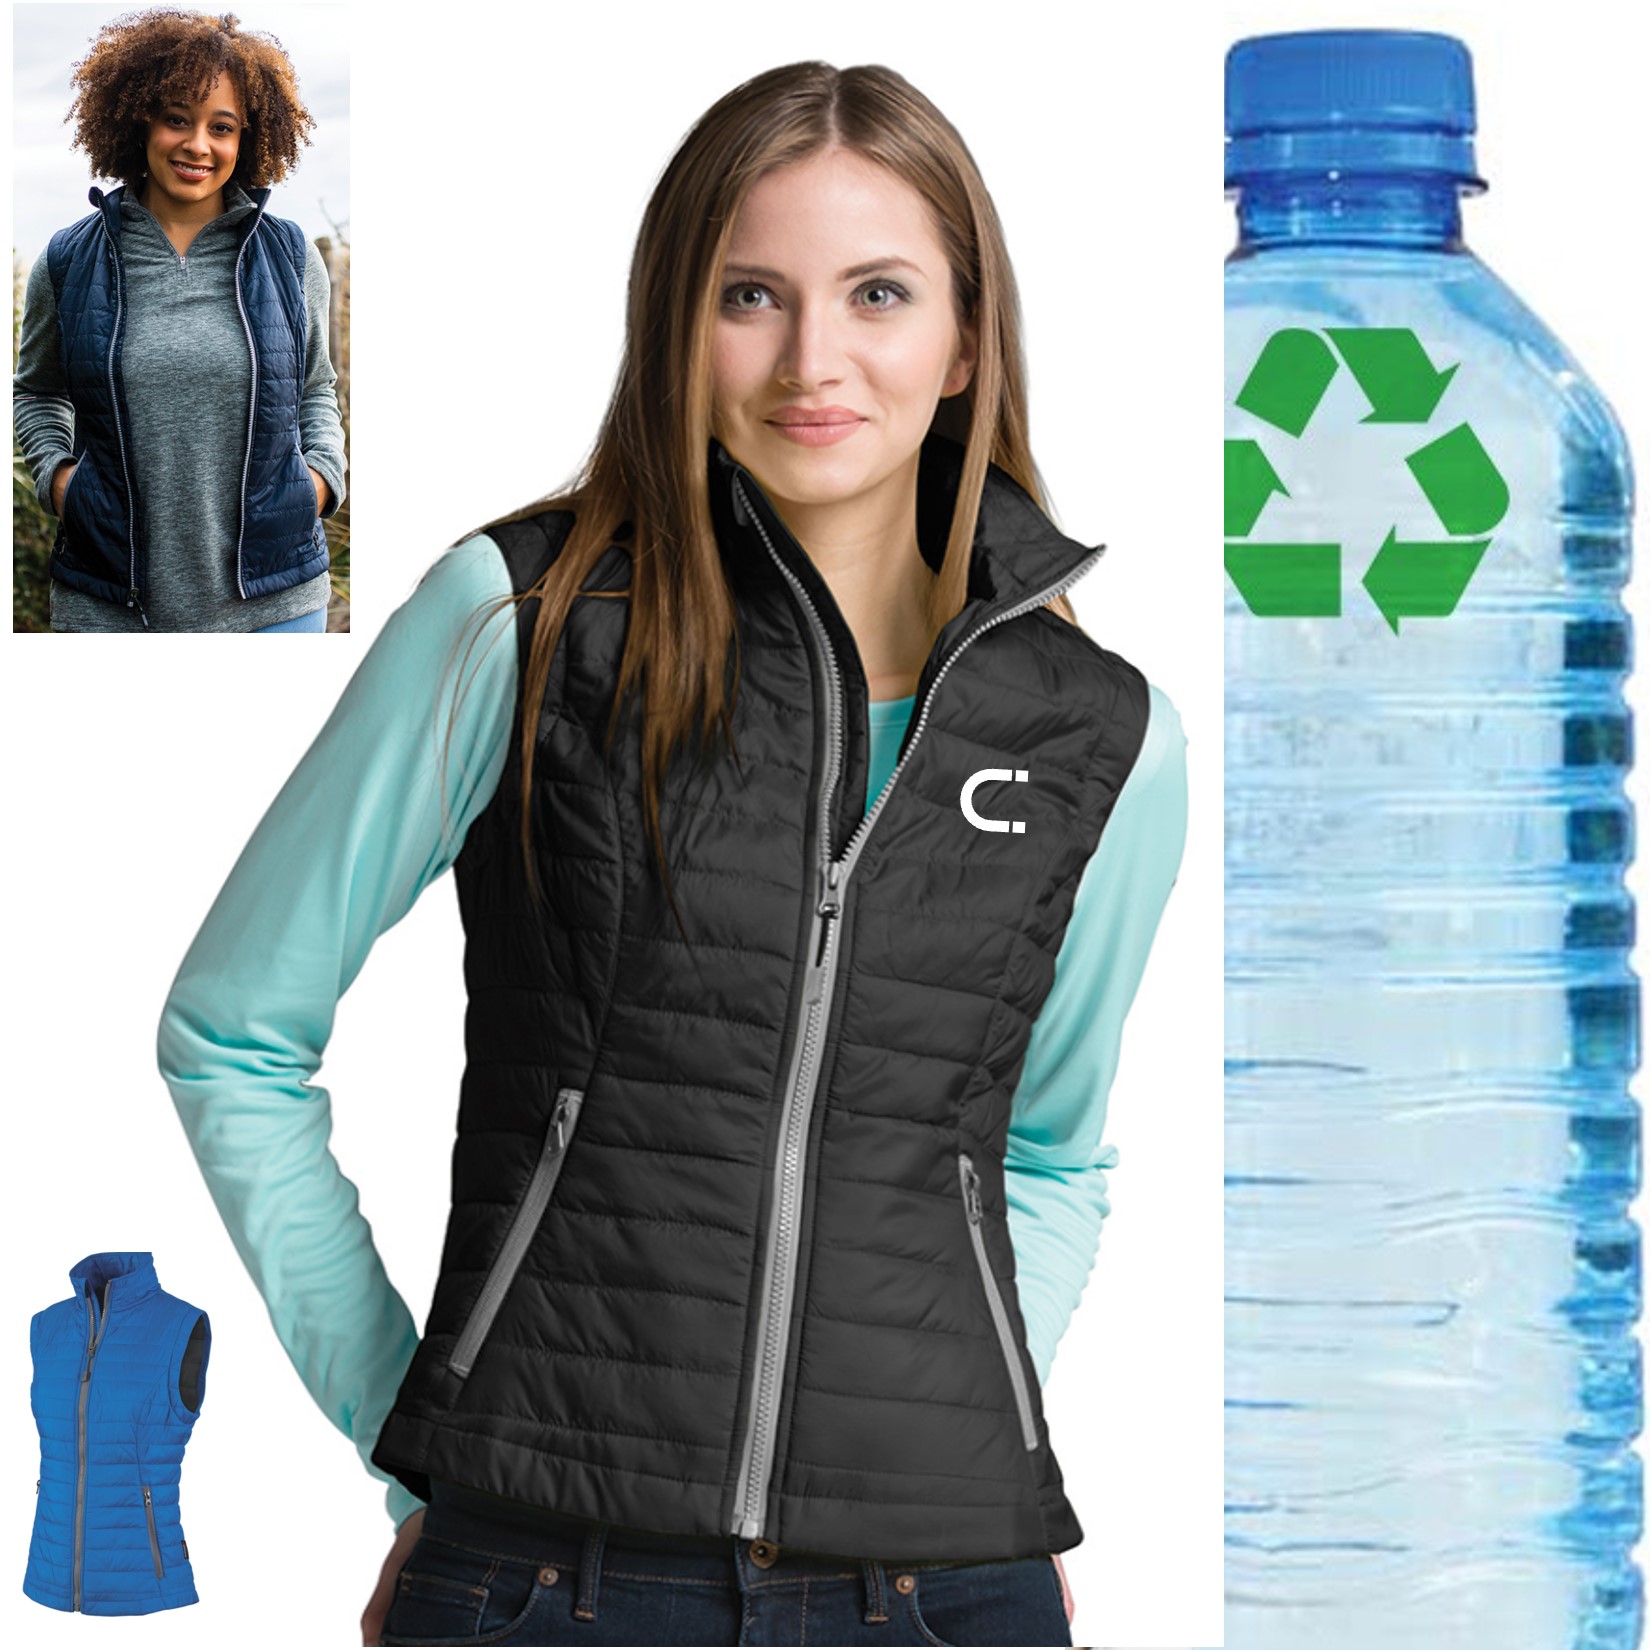 Women's Recycled Water Bottle Branded Eco Vest